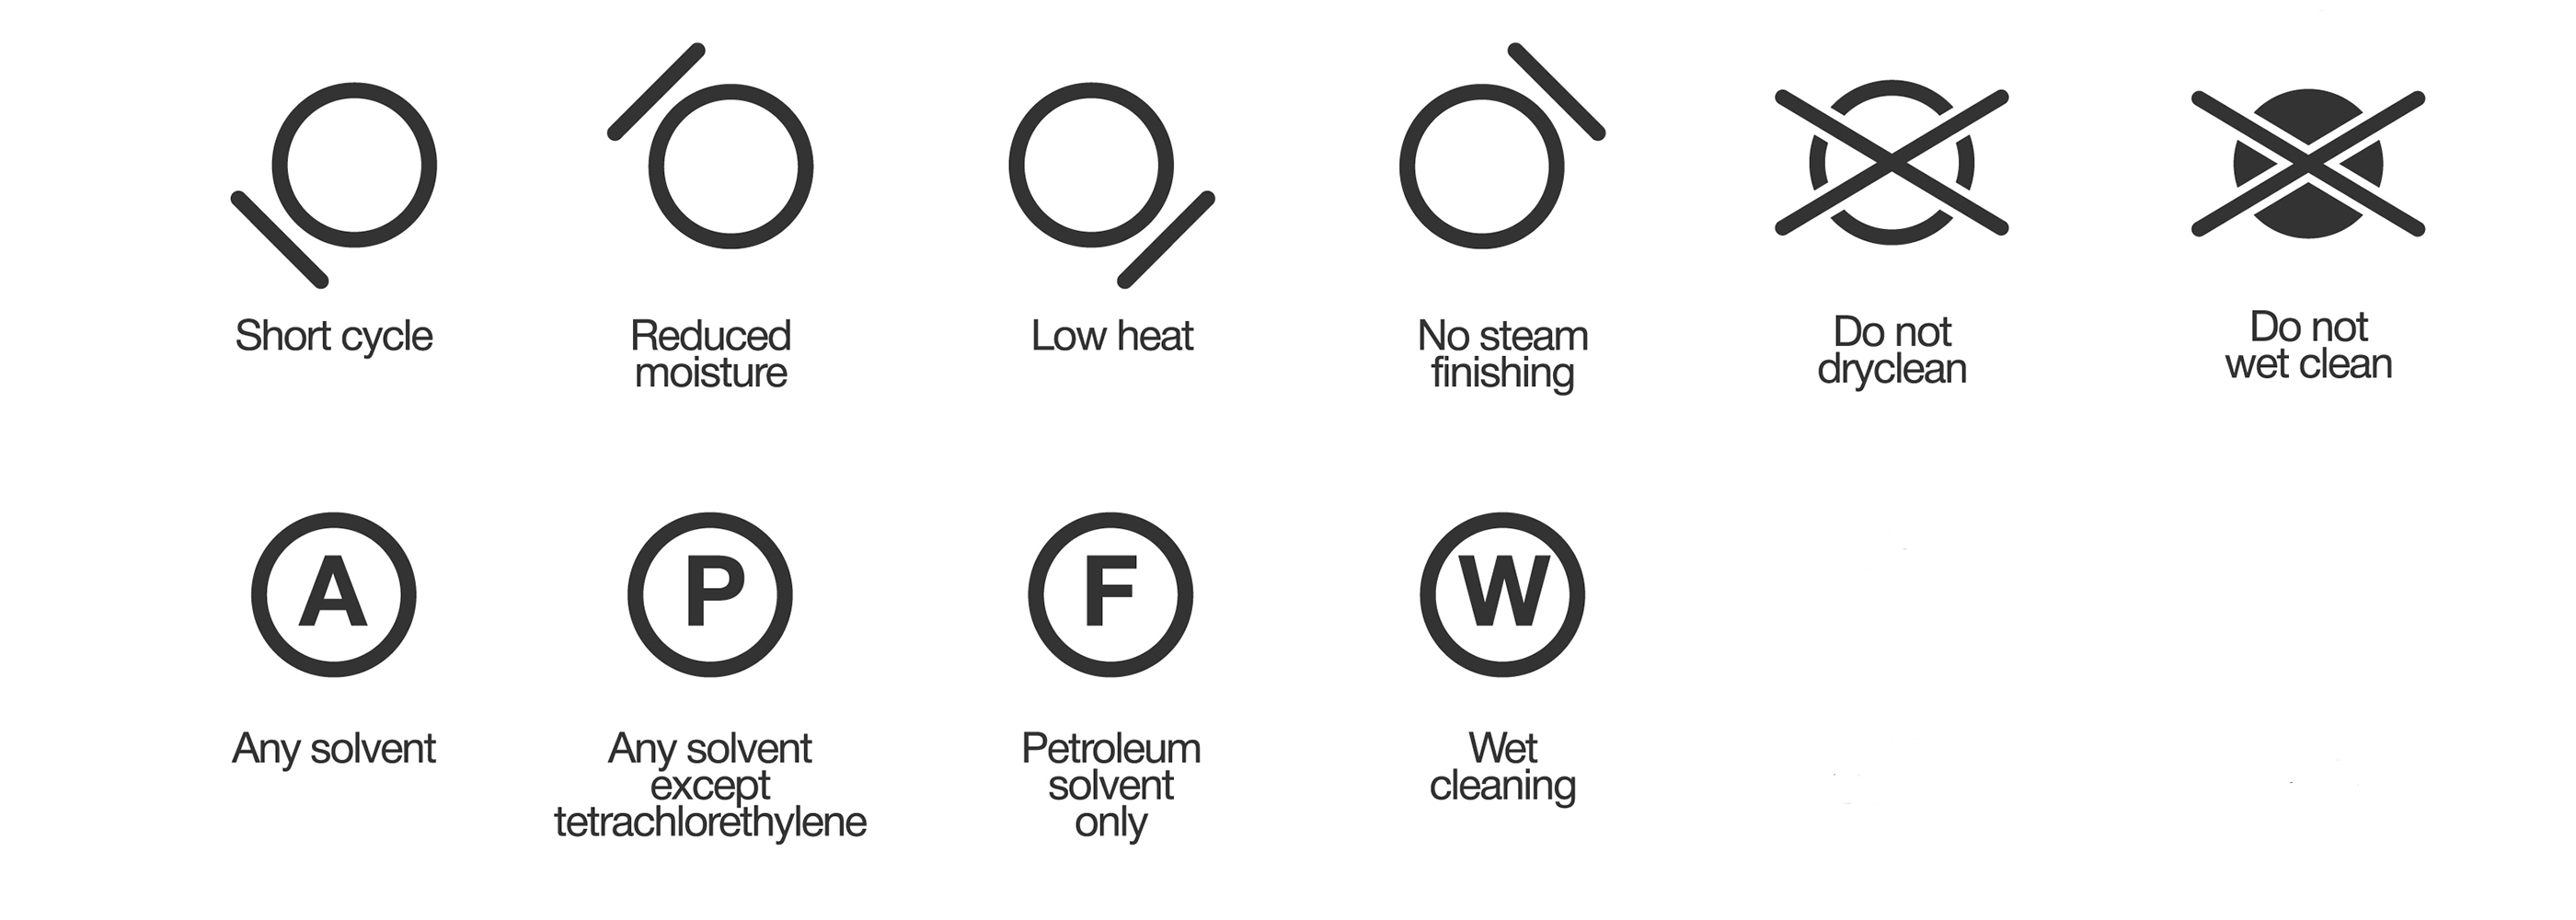 dry clean symbols on the chart